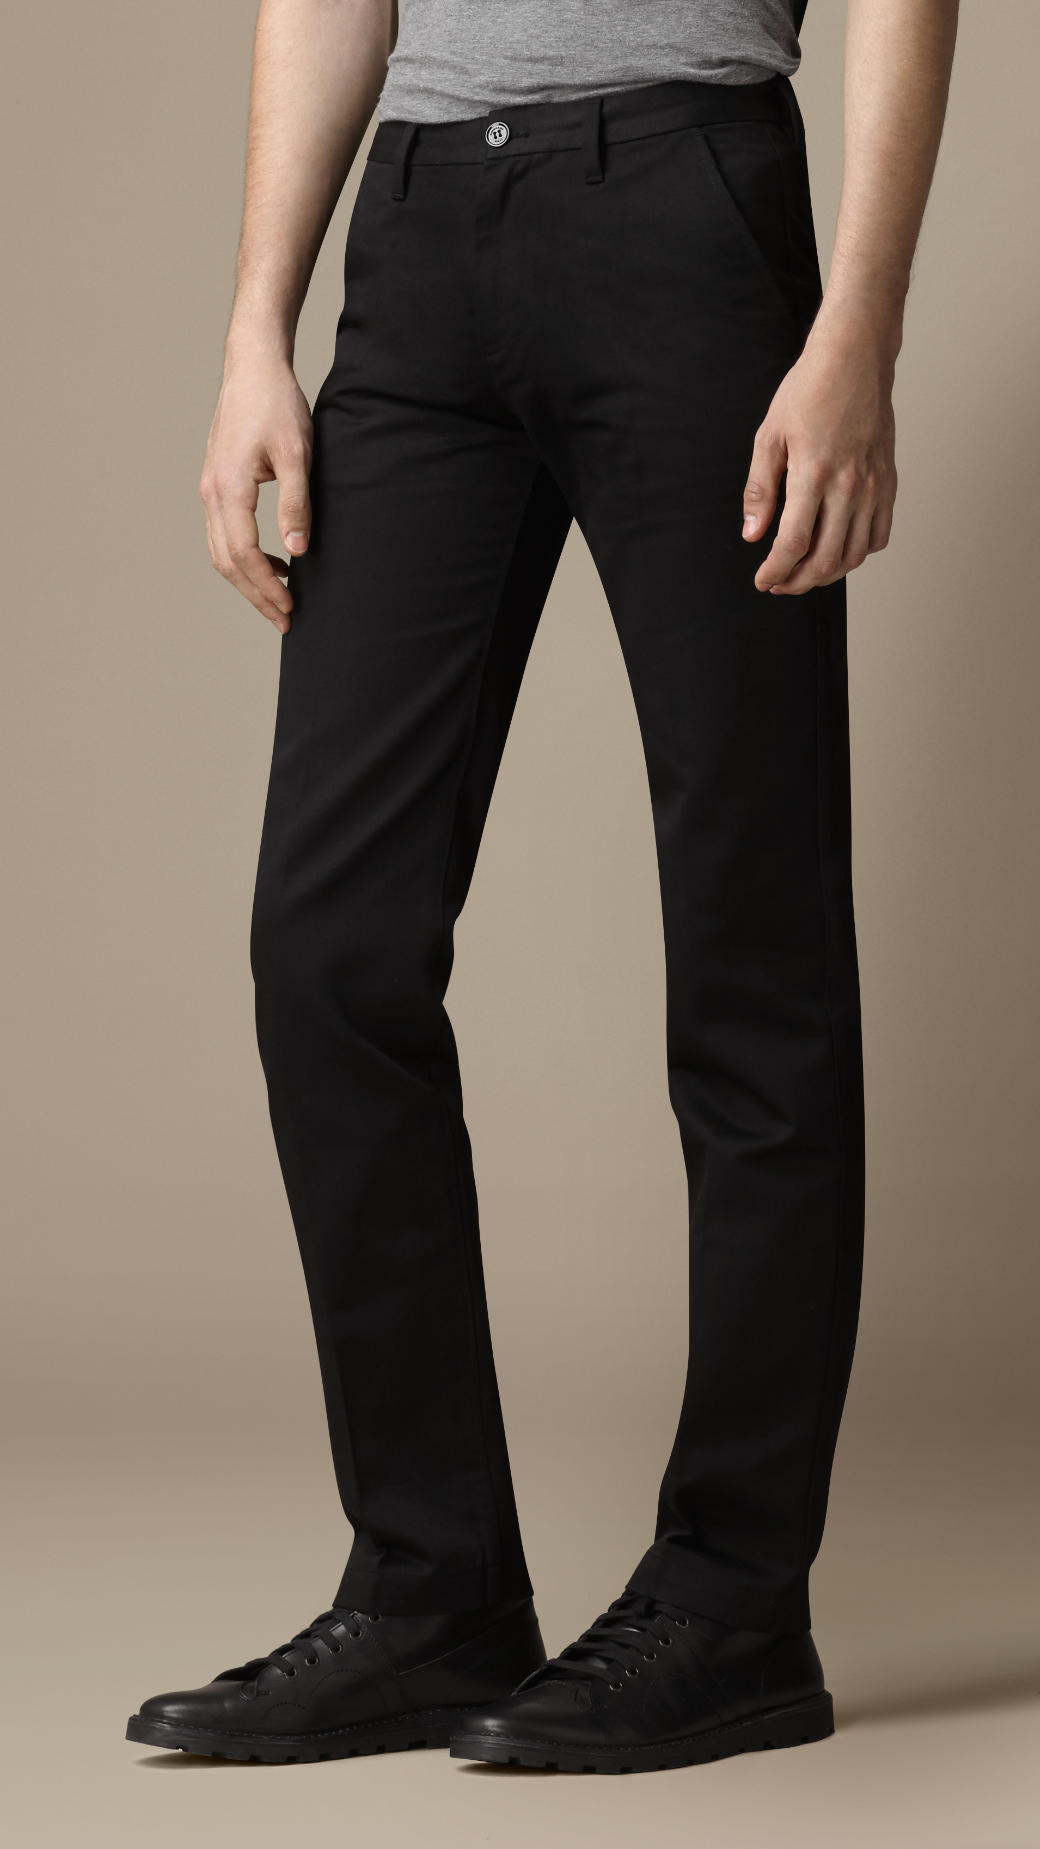 Burberry Slim Fit Technical Cotton Chinos in Black for Men - Lyst